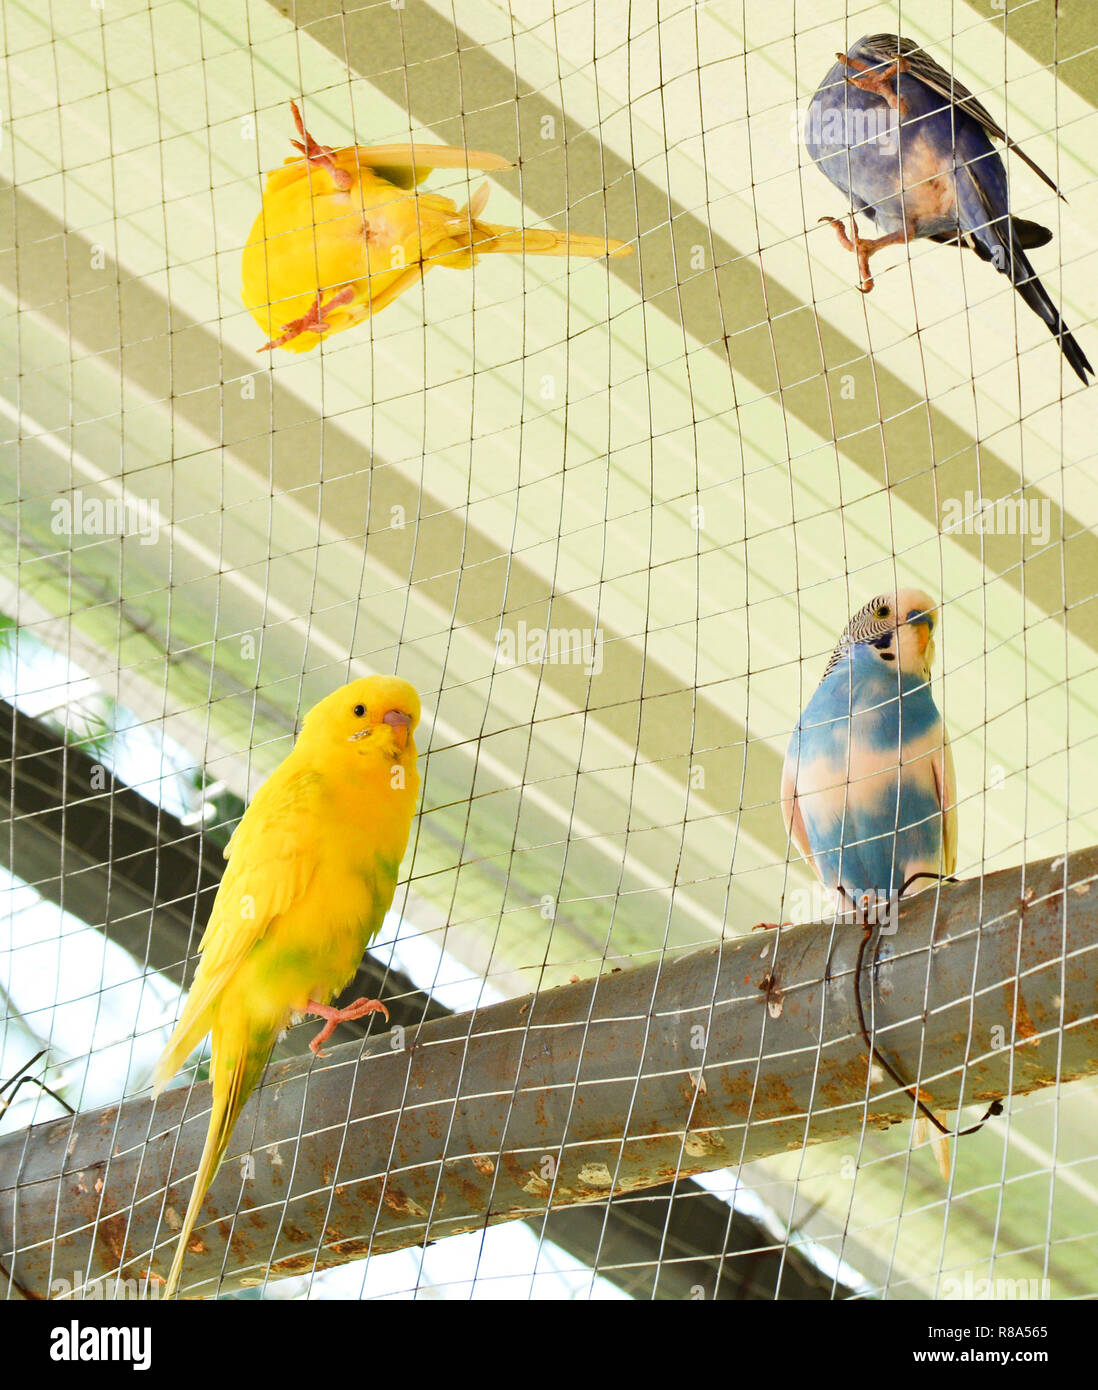 Parrot In Cage Blue And Yellow Budgie Parrot Pet Bird Budgerigar Parakeet Common In The Cage